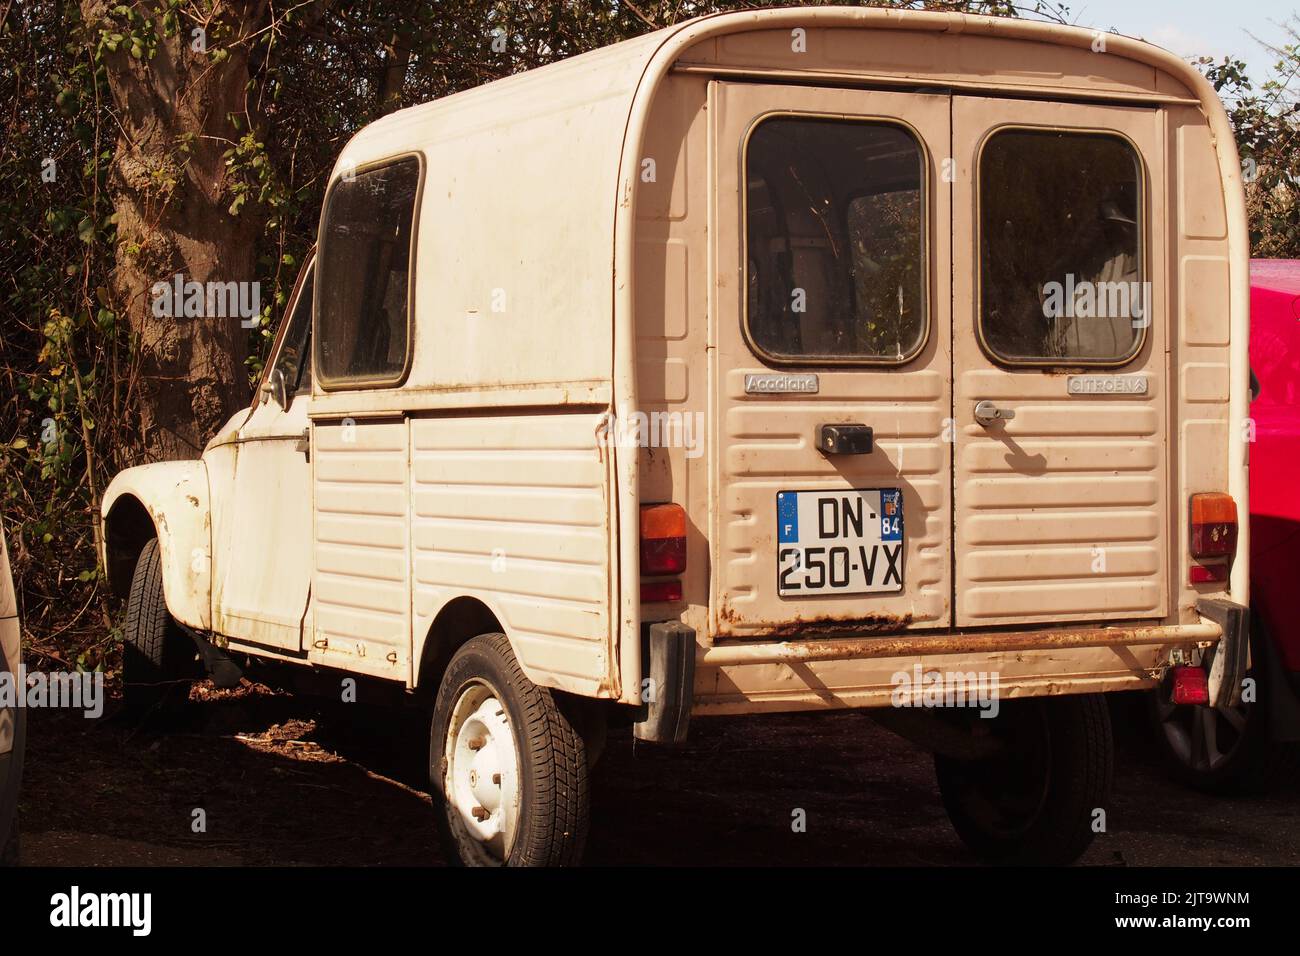 An old, French, Citroen Dyane parked up in a car park lokking from a rear view Stock Photo